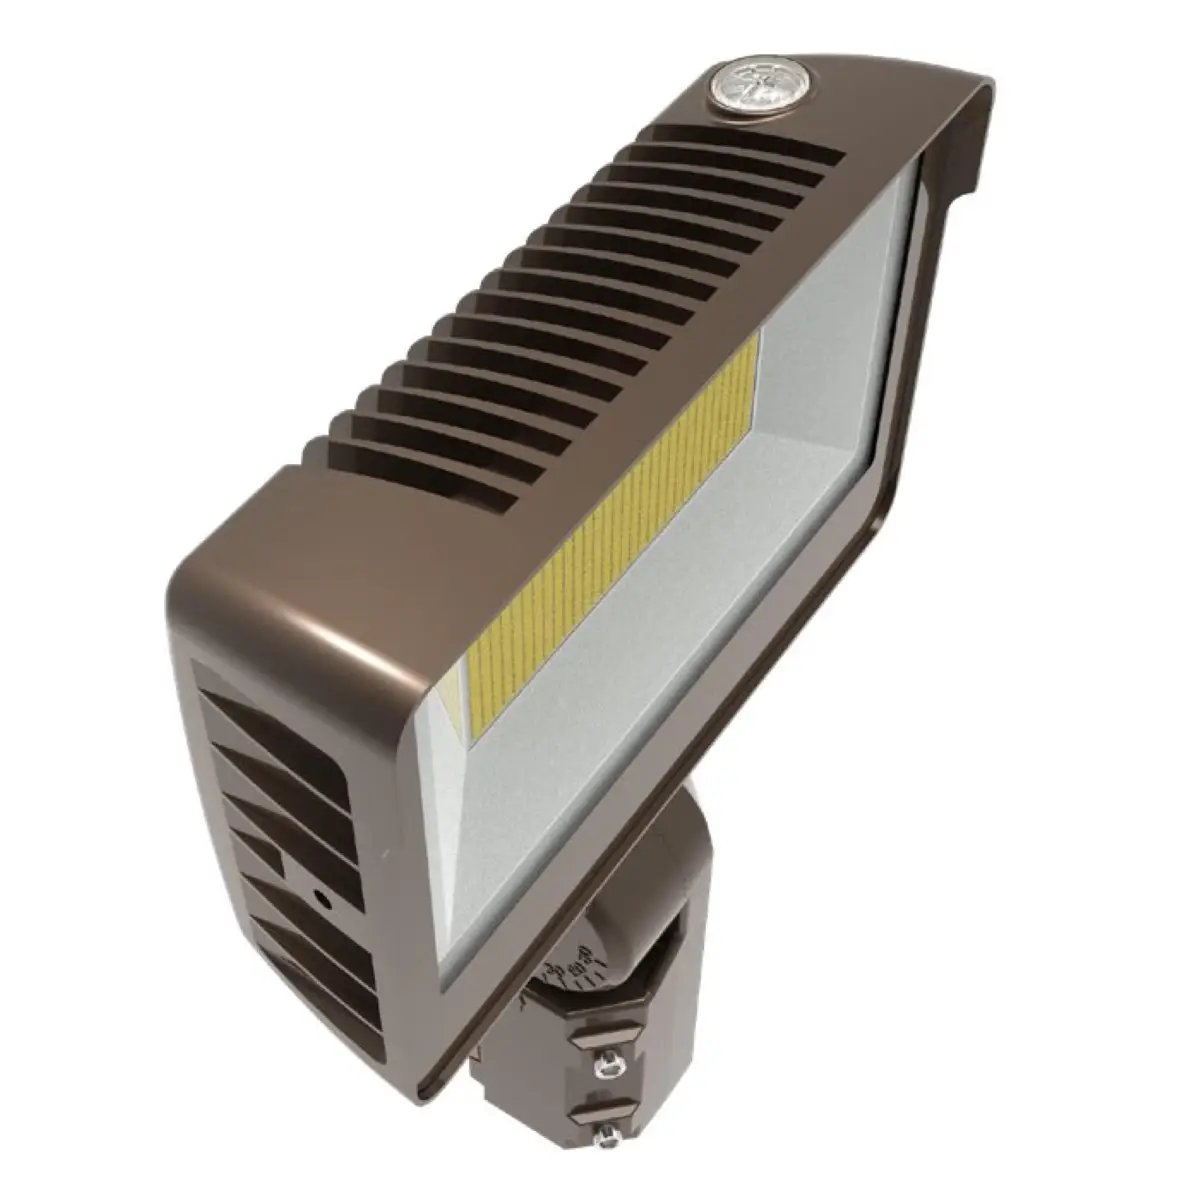 Exterior Flood Light with adjustable white light, universal mounting options, and built-in photocell. 10725 lumens, 75W, LED, 3000K-5000K color temperature, UL Listed, IP65 Rated, DLC Premium Listed. Slip fitter and trunnion mount. Die-cast aluminum, tempered glass. 10.55"W x 3.38"D x 7.05"H. 5-year warranty.